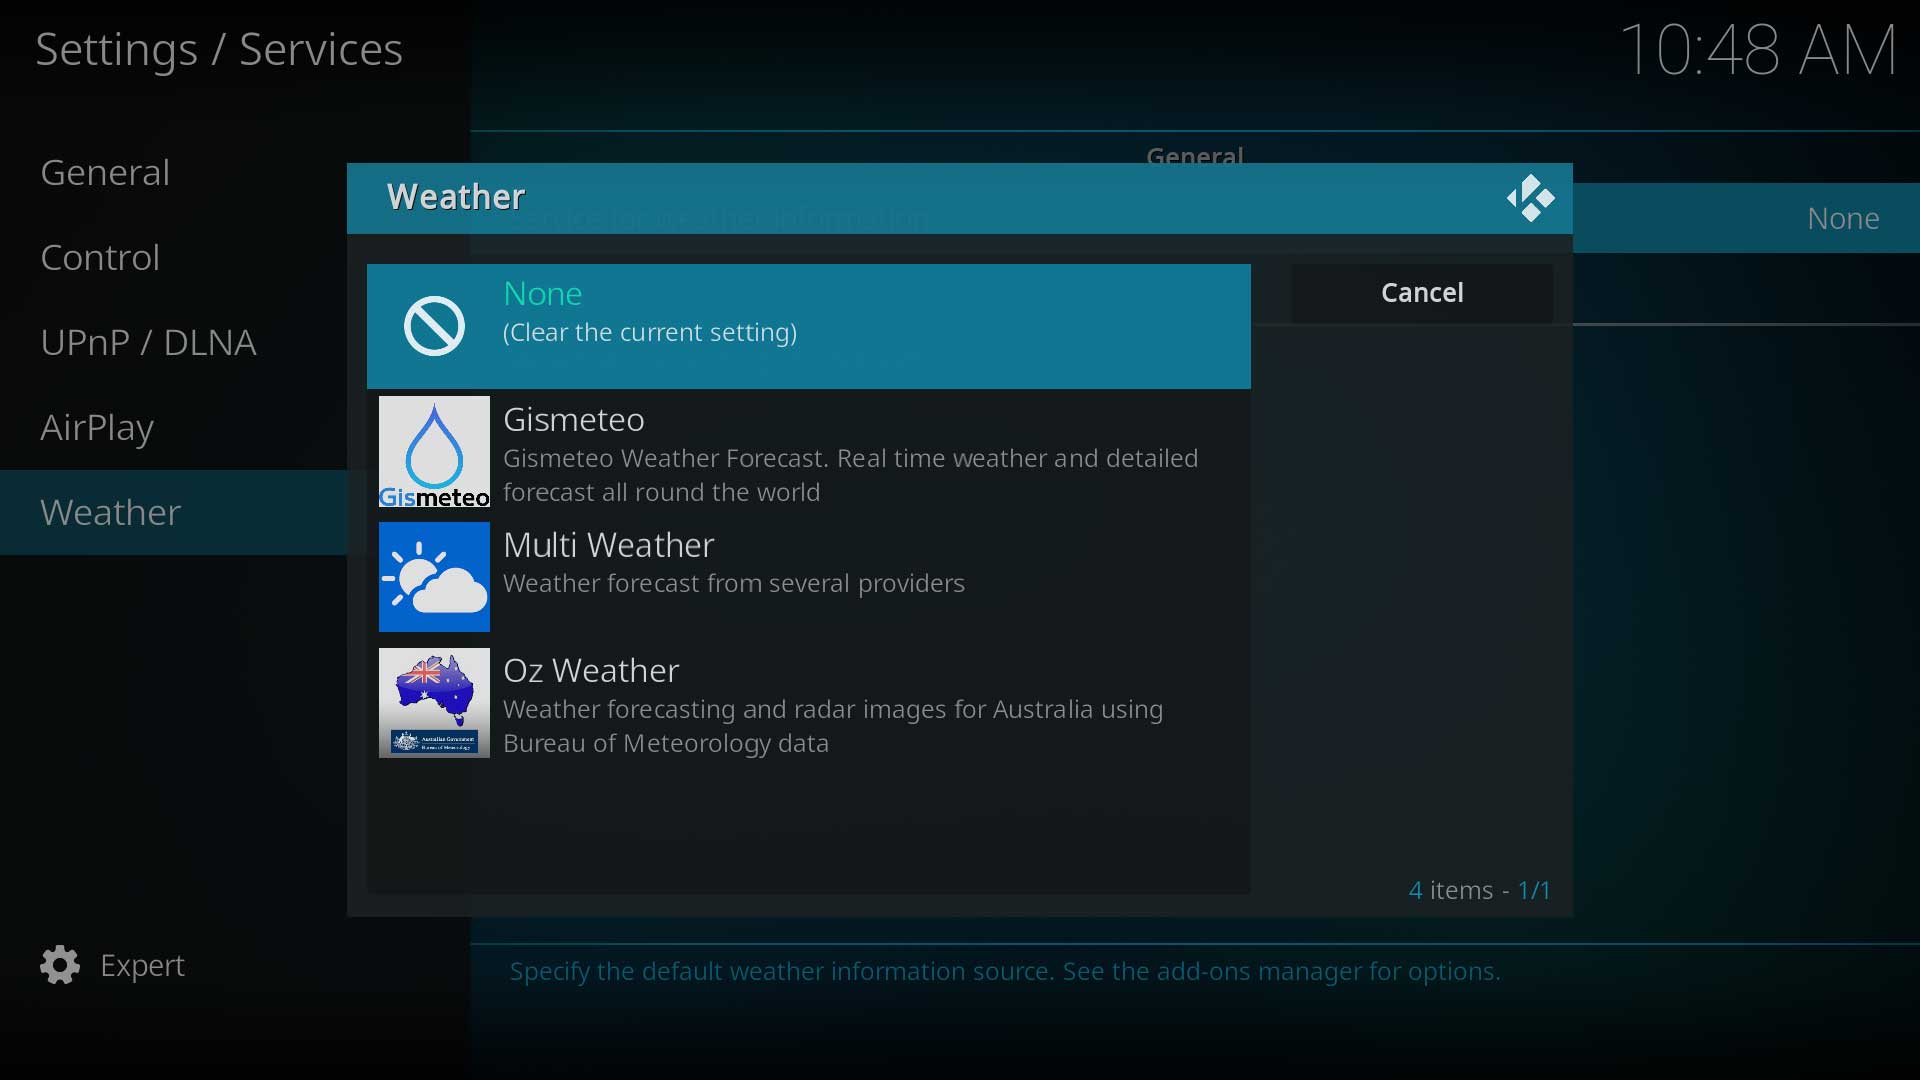 [Image 3] You can install weather add-ons directly from this page by using the Get More... button